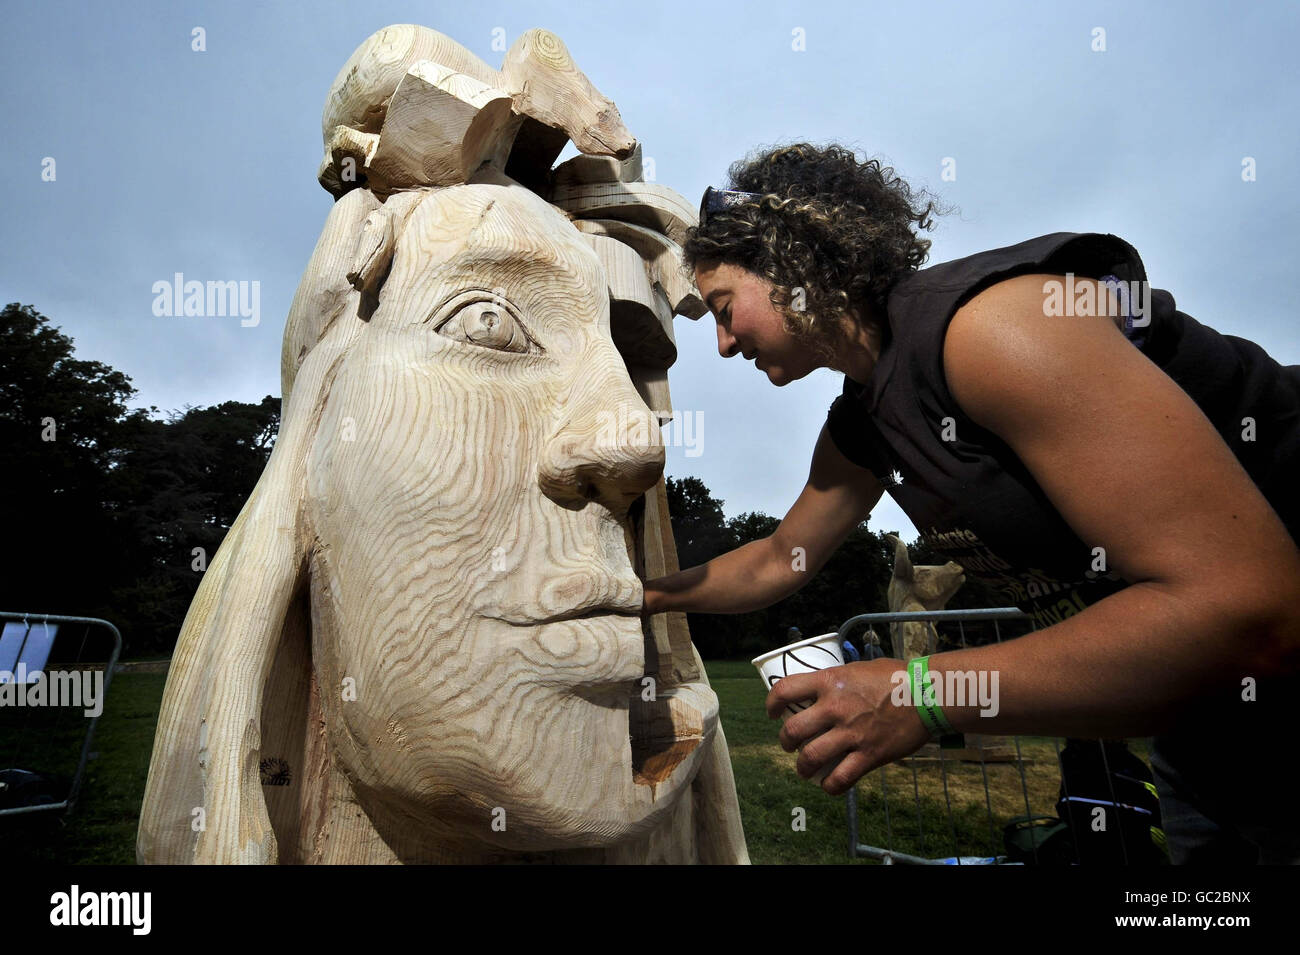 Freelance chainsaw carver Mandy Schmidt begins the finishing touches as she brushes Norwegian oil onto her wood sculpture of the fictional character 'Medusa' at the Festival of the Tree, Westonbirt Abouretum, Gloucestershire. Stock Photo